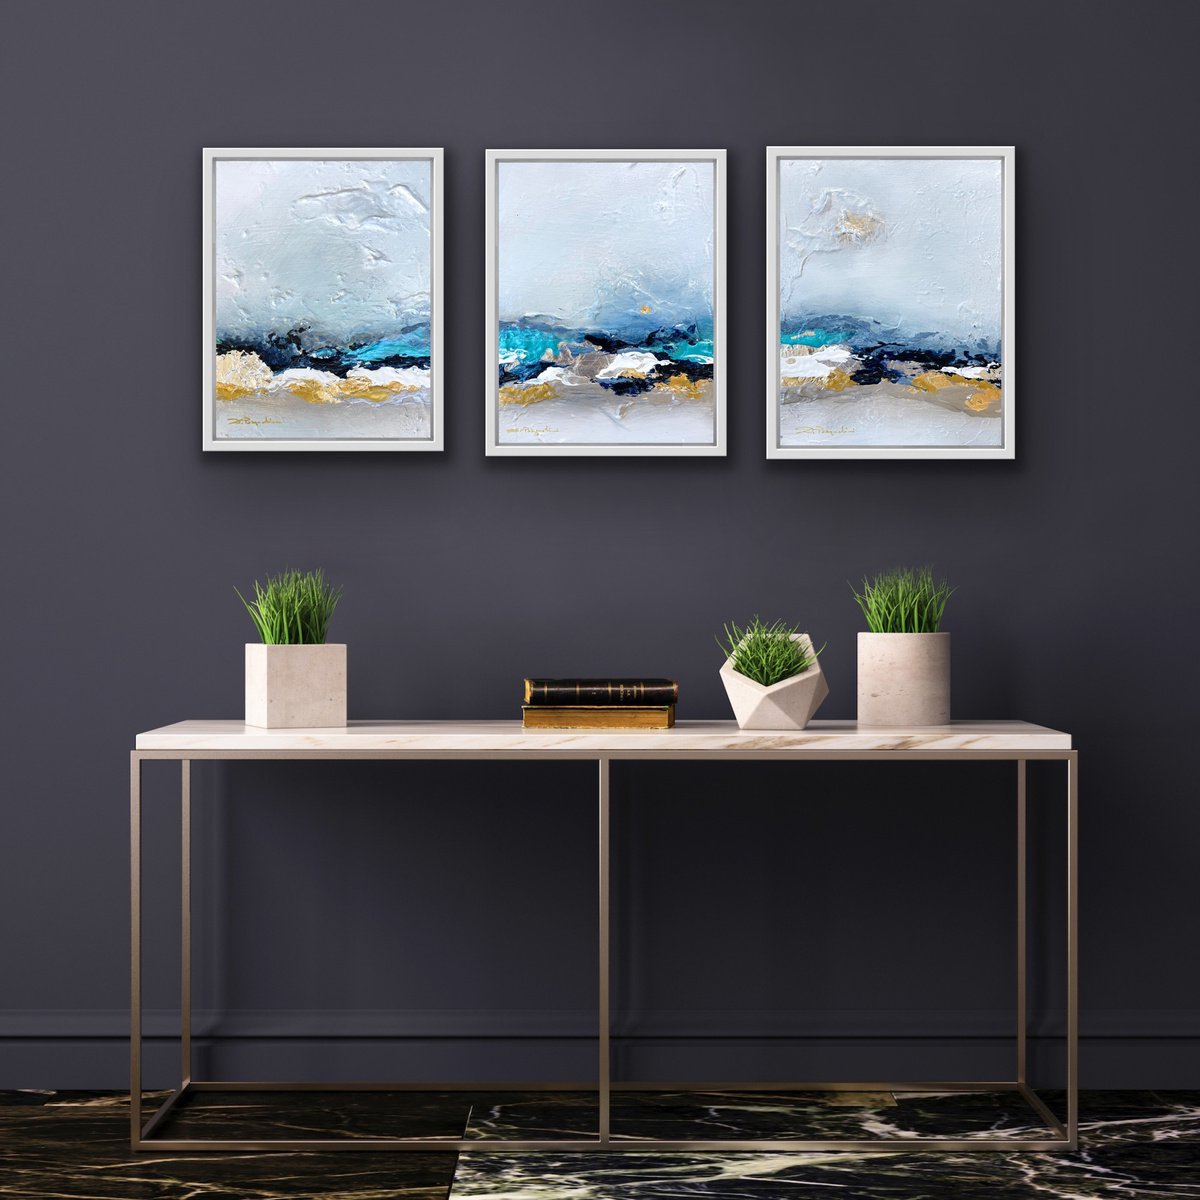 Poetic Landscape XXXb - Composition 3 paintings framed - Wall Art Ready to hang by Daniela Pasqualini